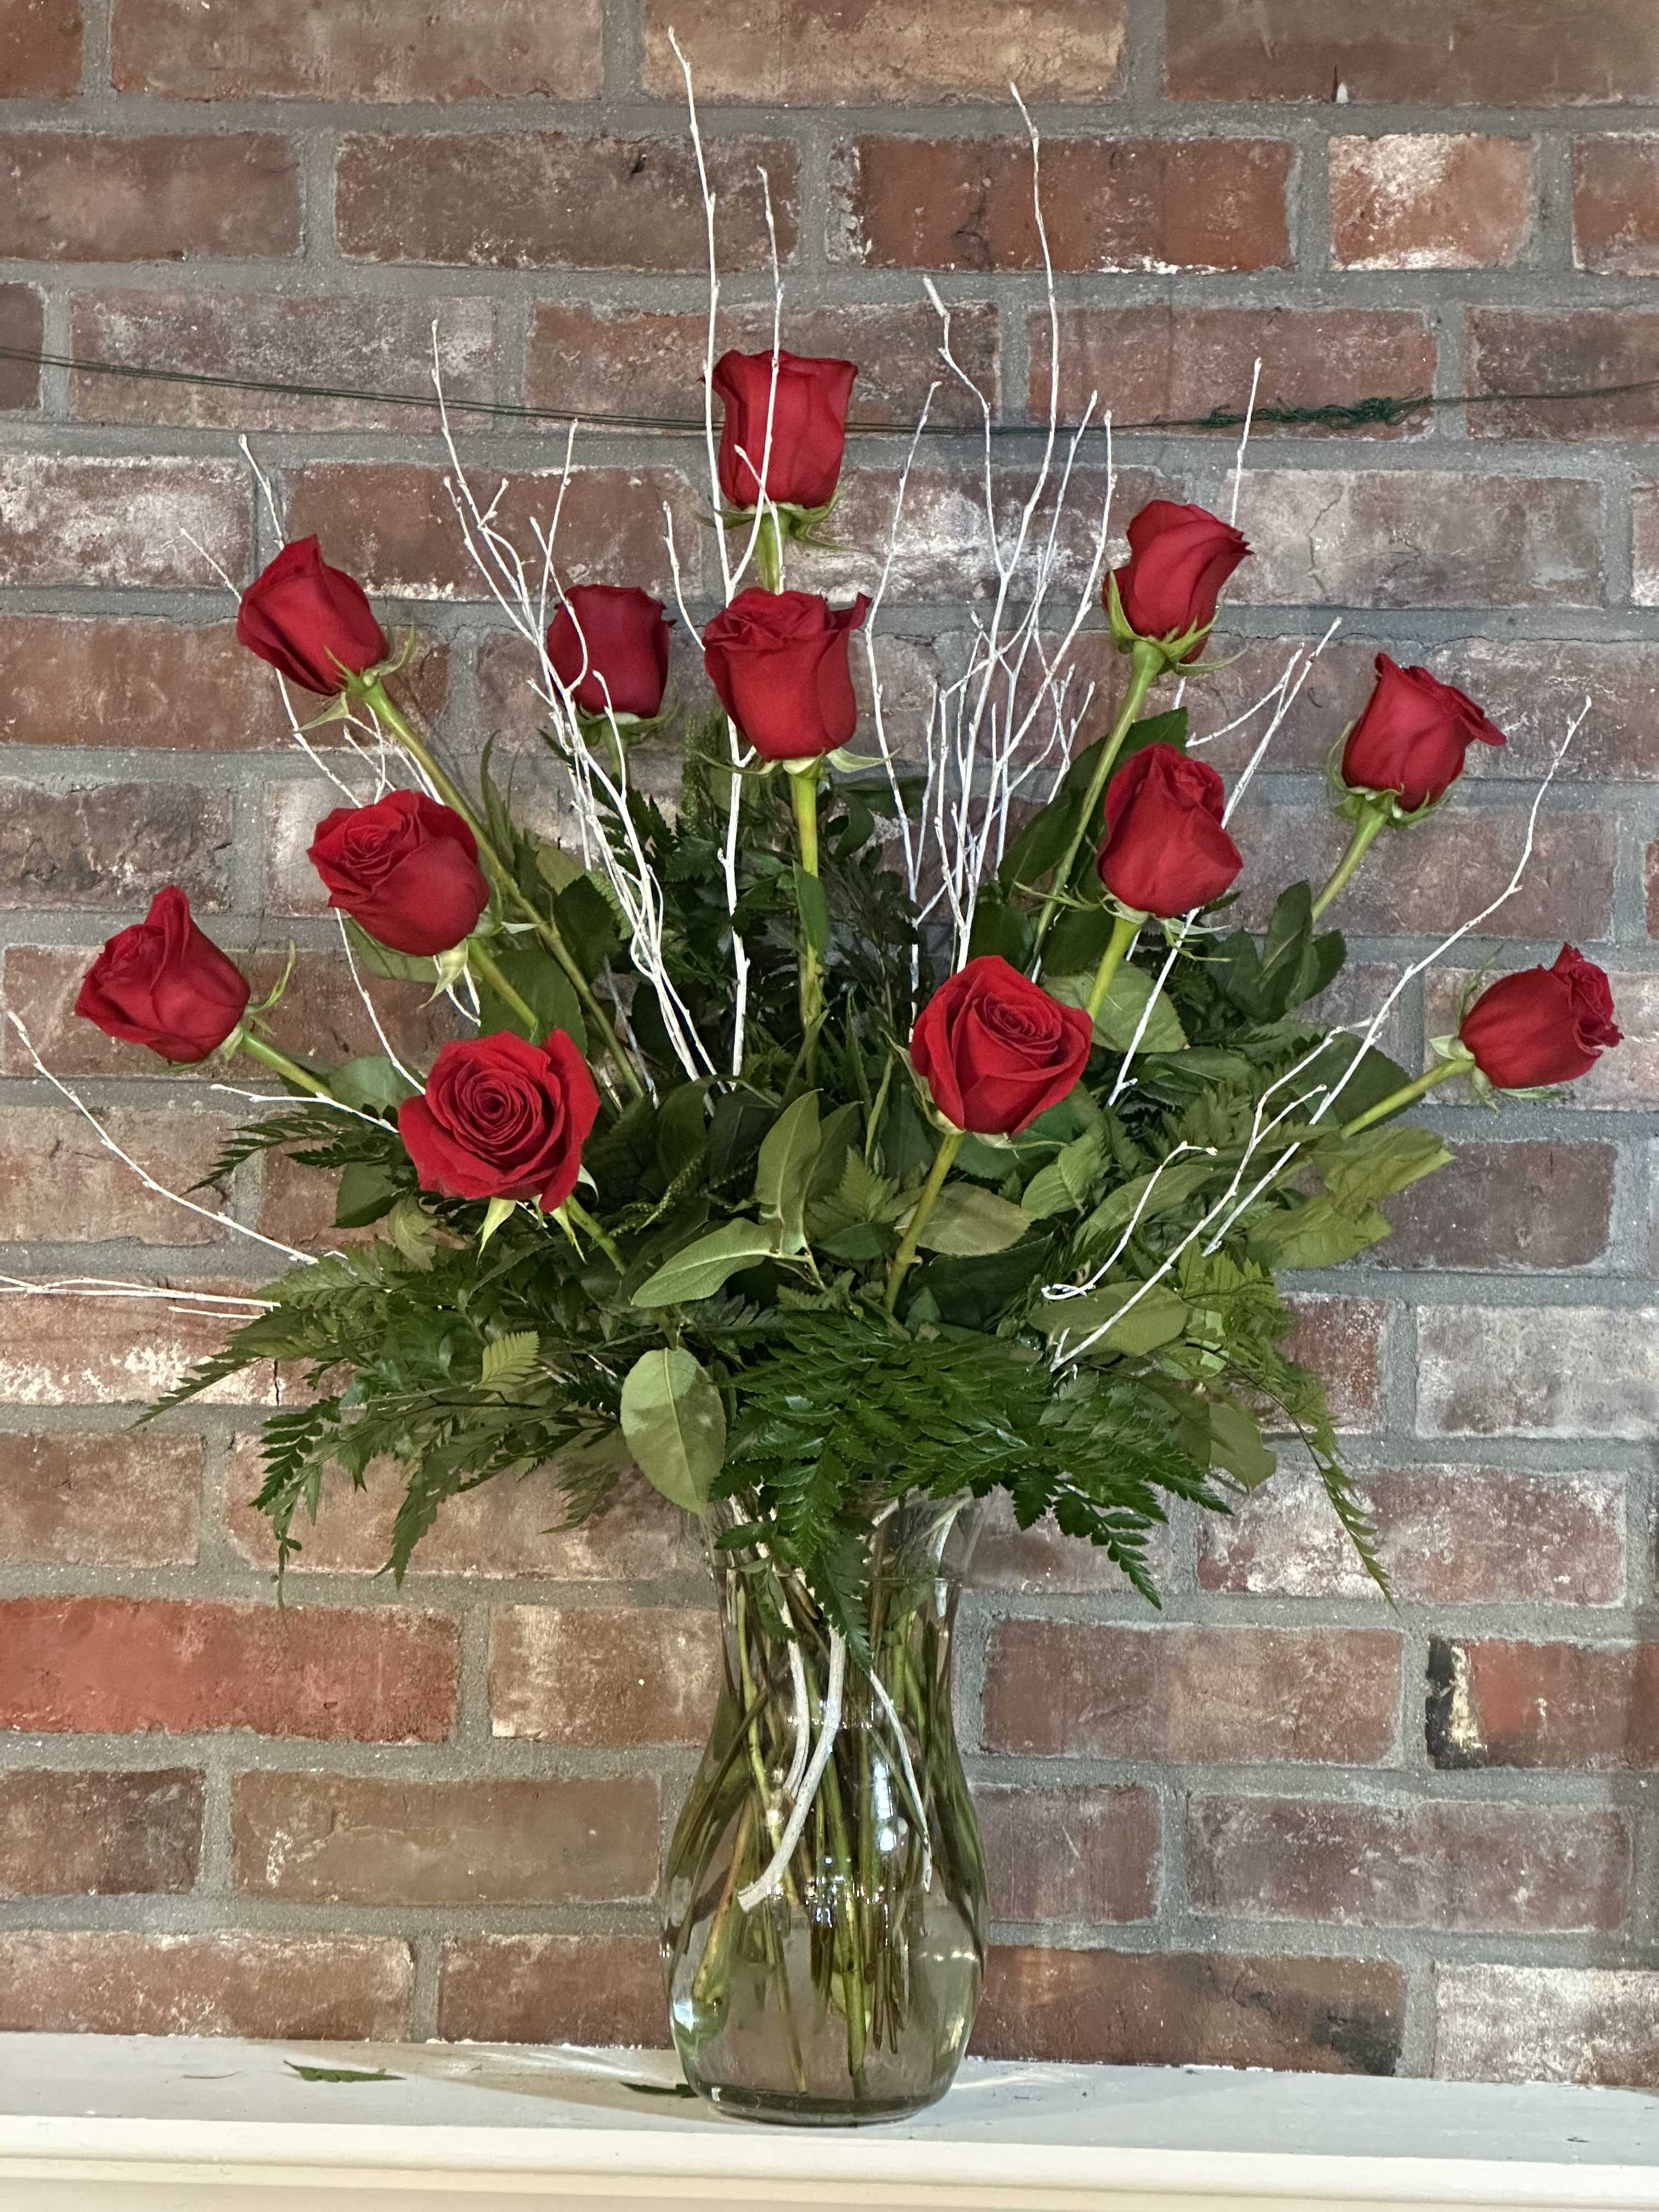 Twelve Red Roses - A charming bouquet of a dozen fresh and fragrant red roses, adorned with just a bit of greenery, is a classic Valentine’s Day gift. Delivered in a clear glass vase, this bouquet is also a romantic standard for any day of the year.